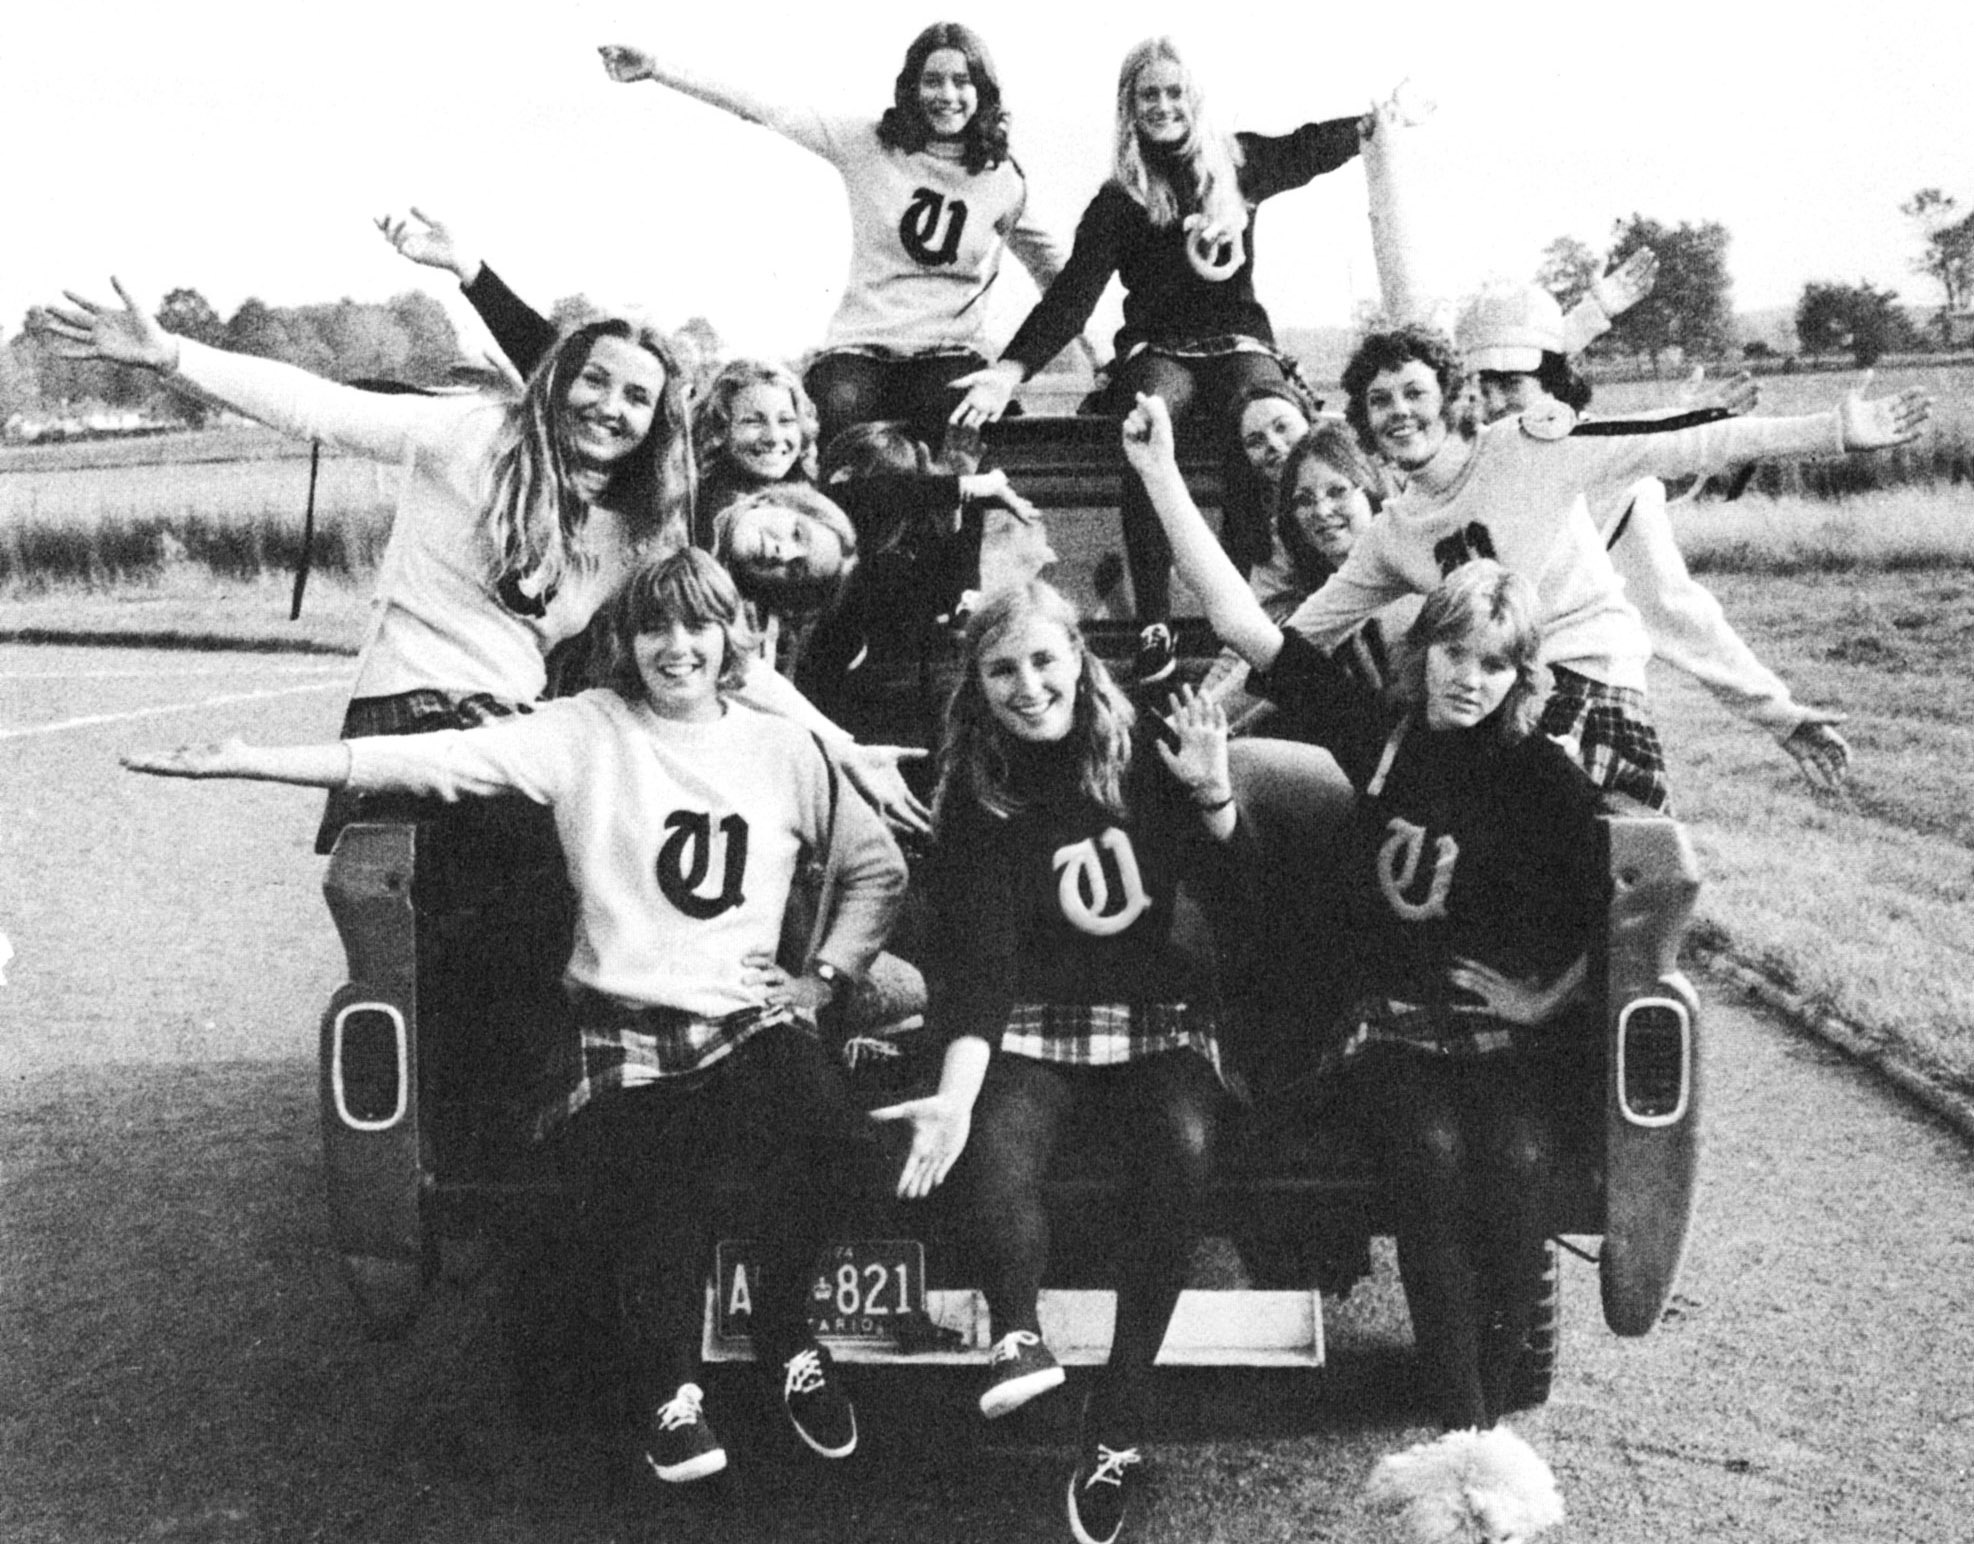 (Click to magnify) We can give you the names of the cheerleaders but not in any specified order - Alas!:  Kathy Mason, Jane Akerman, Monica Bayard, Carola Bolle, Jane Emslie, Kim Grieg, Linda Kaye, Denise McConney, Wendy McConney, Val. McDonnell (captain)